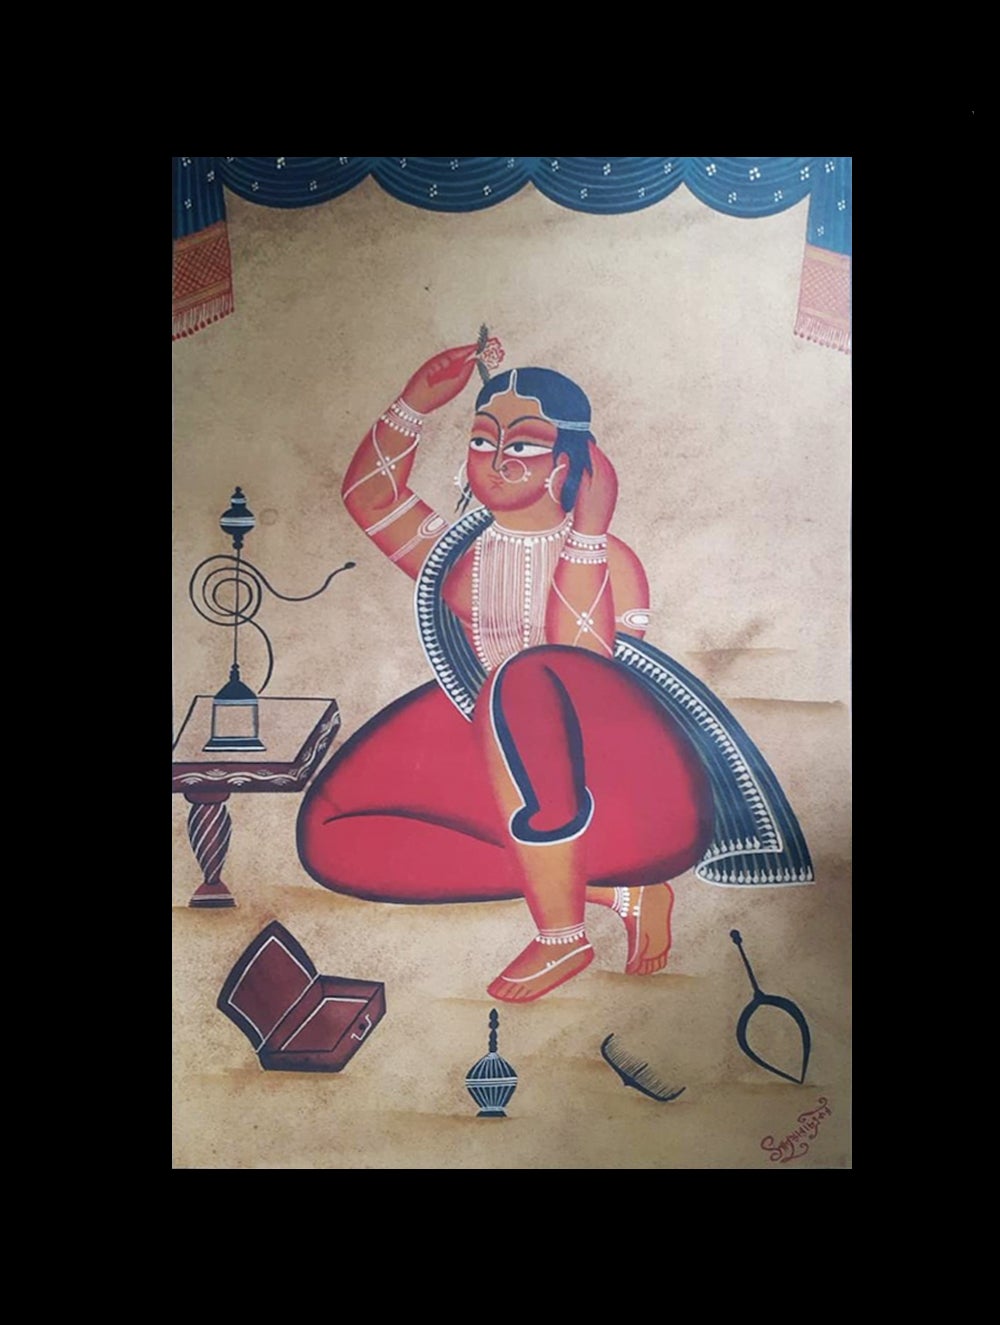 Load image into Gallery viewer, Kalighat Painting With Mount - Shola Shringar (25&quot; x 17&quot;)